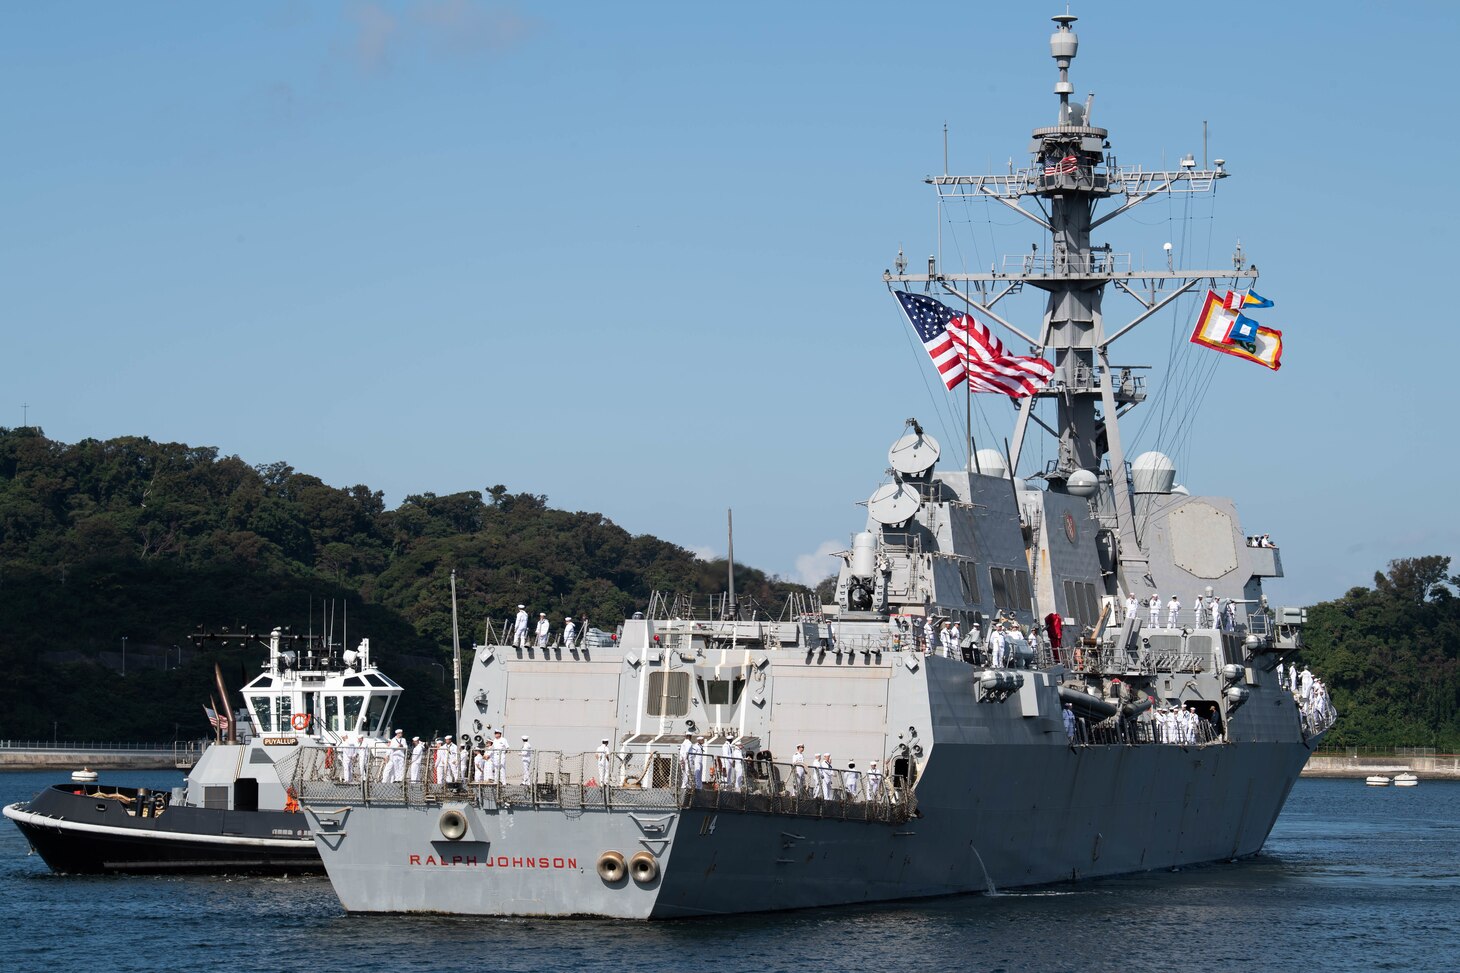 YOKOSUKA, Japan (Oct. 04, 2021) The Arleigh Burke-class guided-missile destroyer USS Ralph Johnson (DDG 114) arrives at Commander, Fleet Activities Yokosuka (CFAY) as one of the newest additions to Commander, Task Force (CTF) 71/Destroyer Squadron (DESRON) 15. For more than 75 years, CFAY has provided, maintained, and operated base facilities and services in support of the U.S. 7th Fleet’s forward-deployed naval forces, tenant commands, and thousands of military and civilian personnel and their families (U.S. Navy photo by Tetsuya Morita)